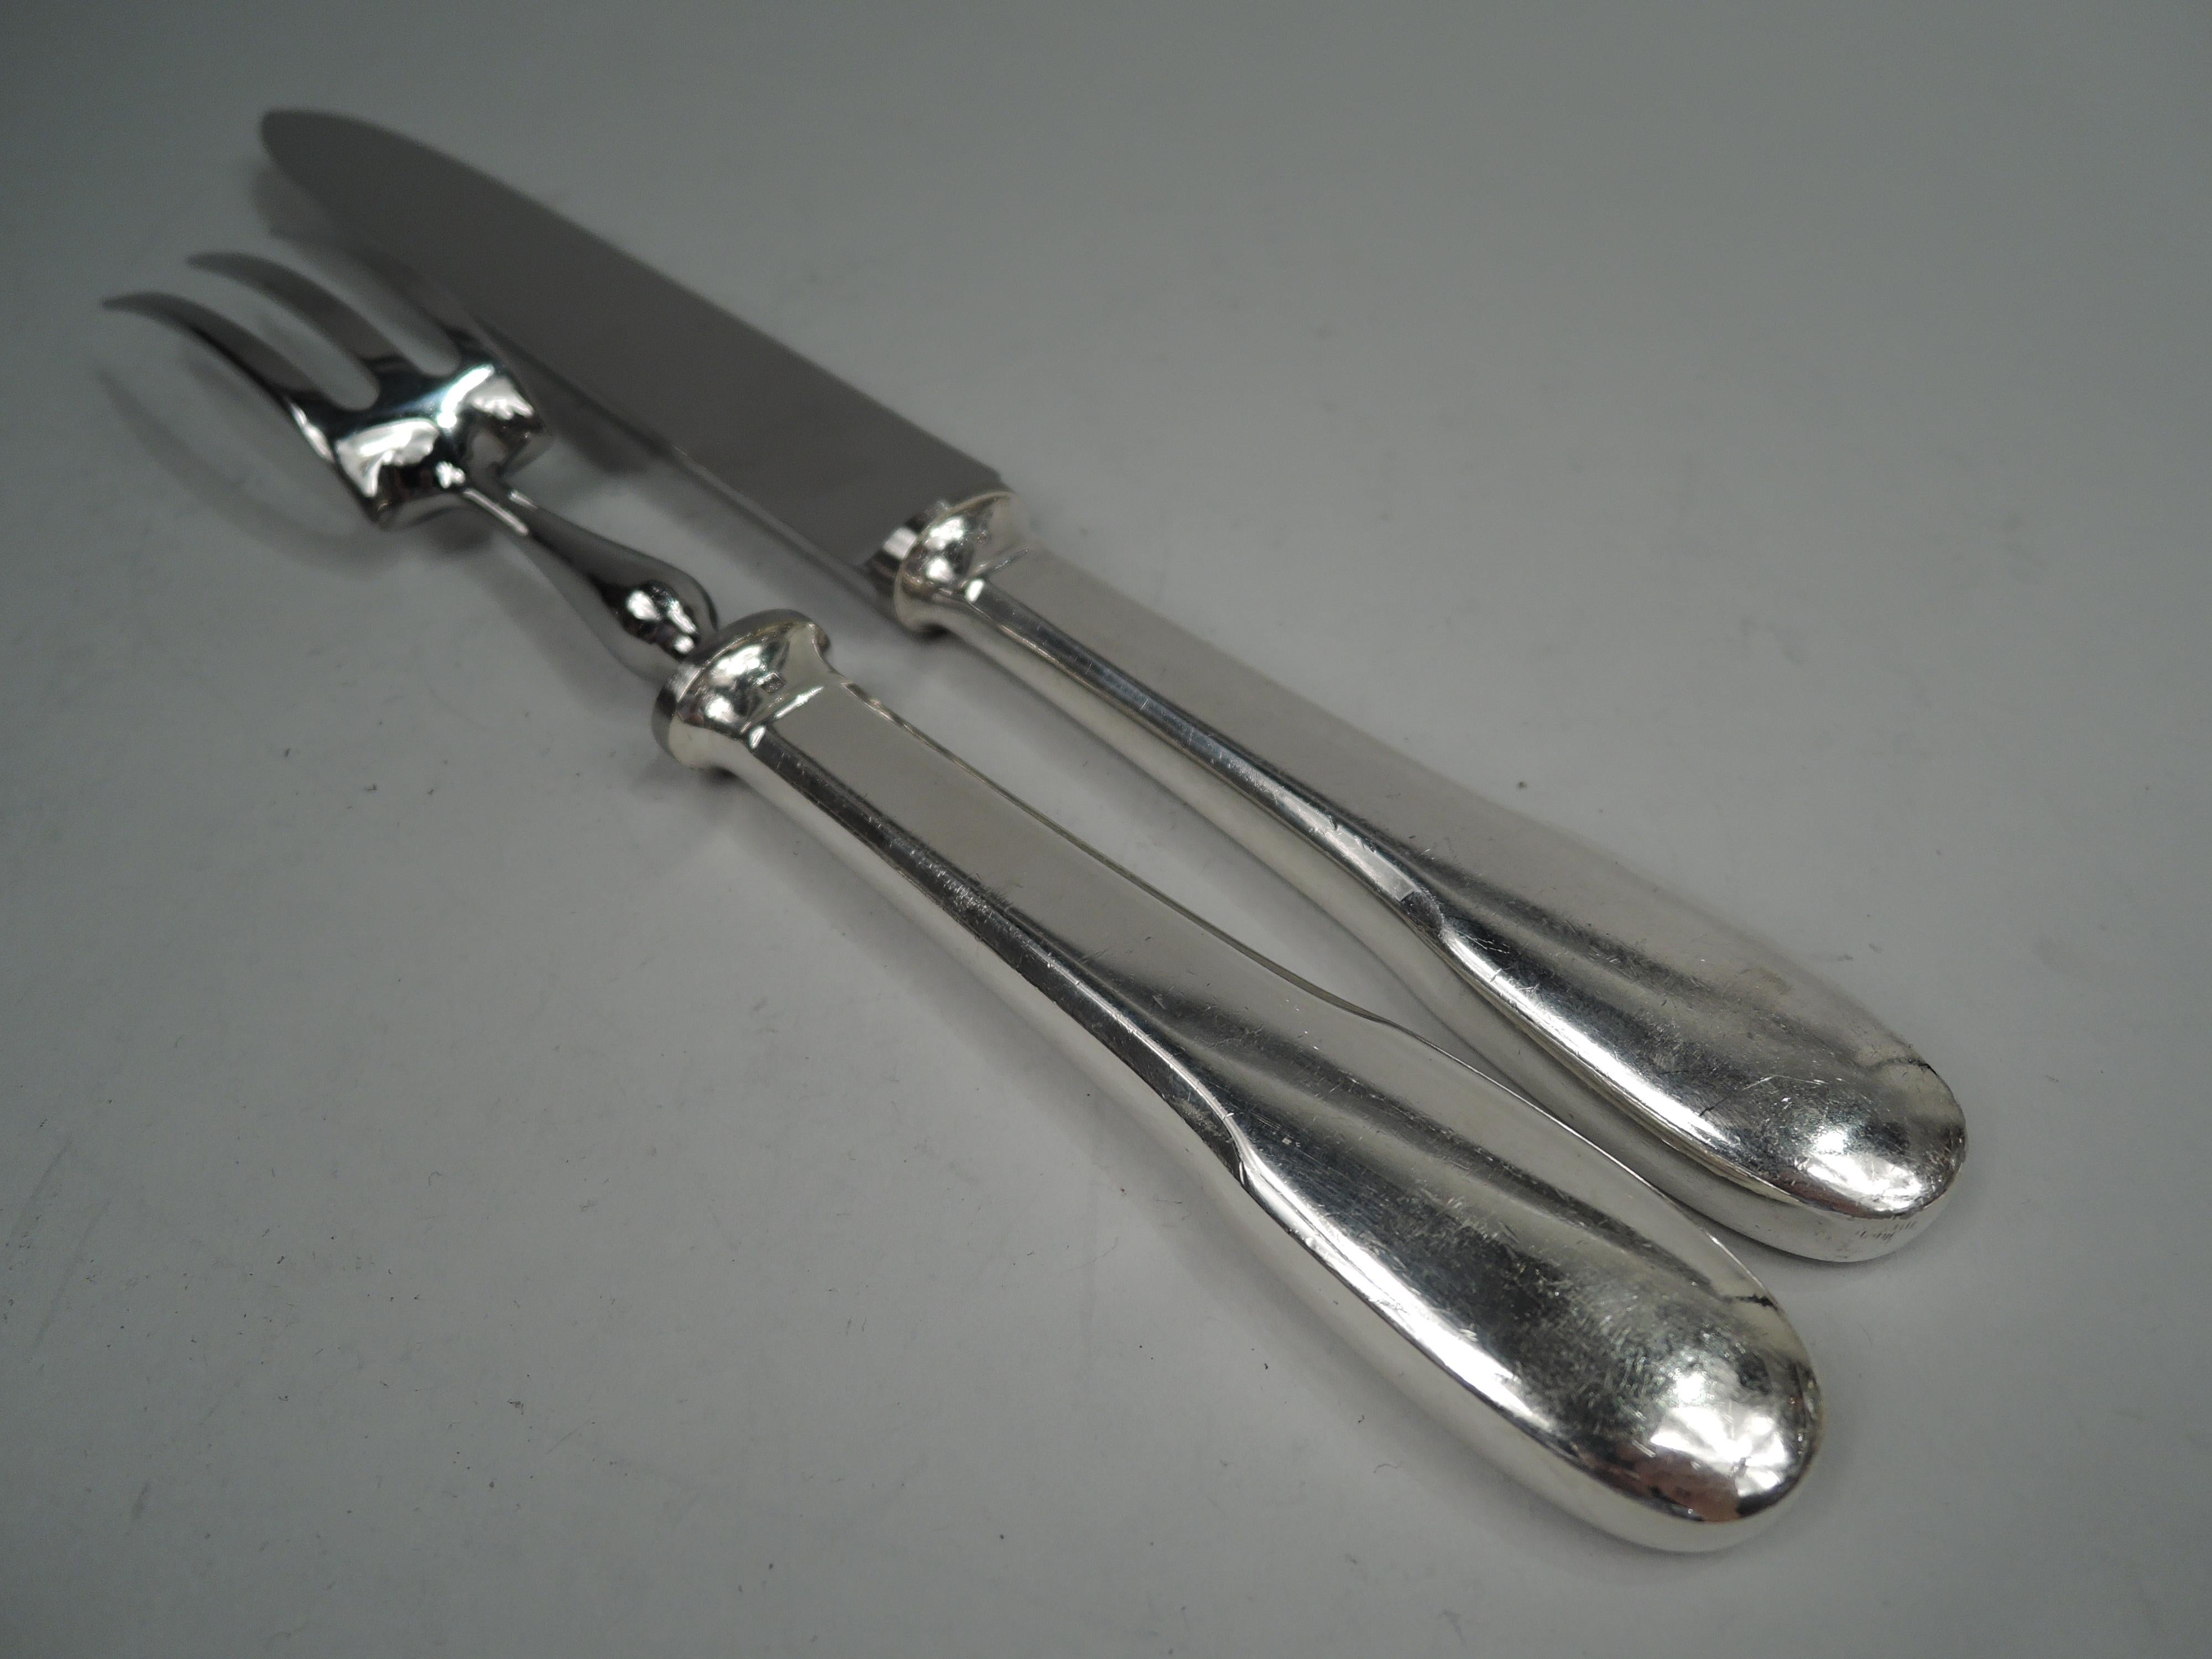 Modern carving pair with knife and fork. Made by Christofle in France, ca 1970. Tapering easy-grip silver-plated handles. Knife blade and 3-tine shank are stainless steel. Handy for the holidays and all the days in between. Marked.  

Dimensions: